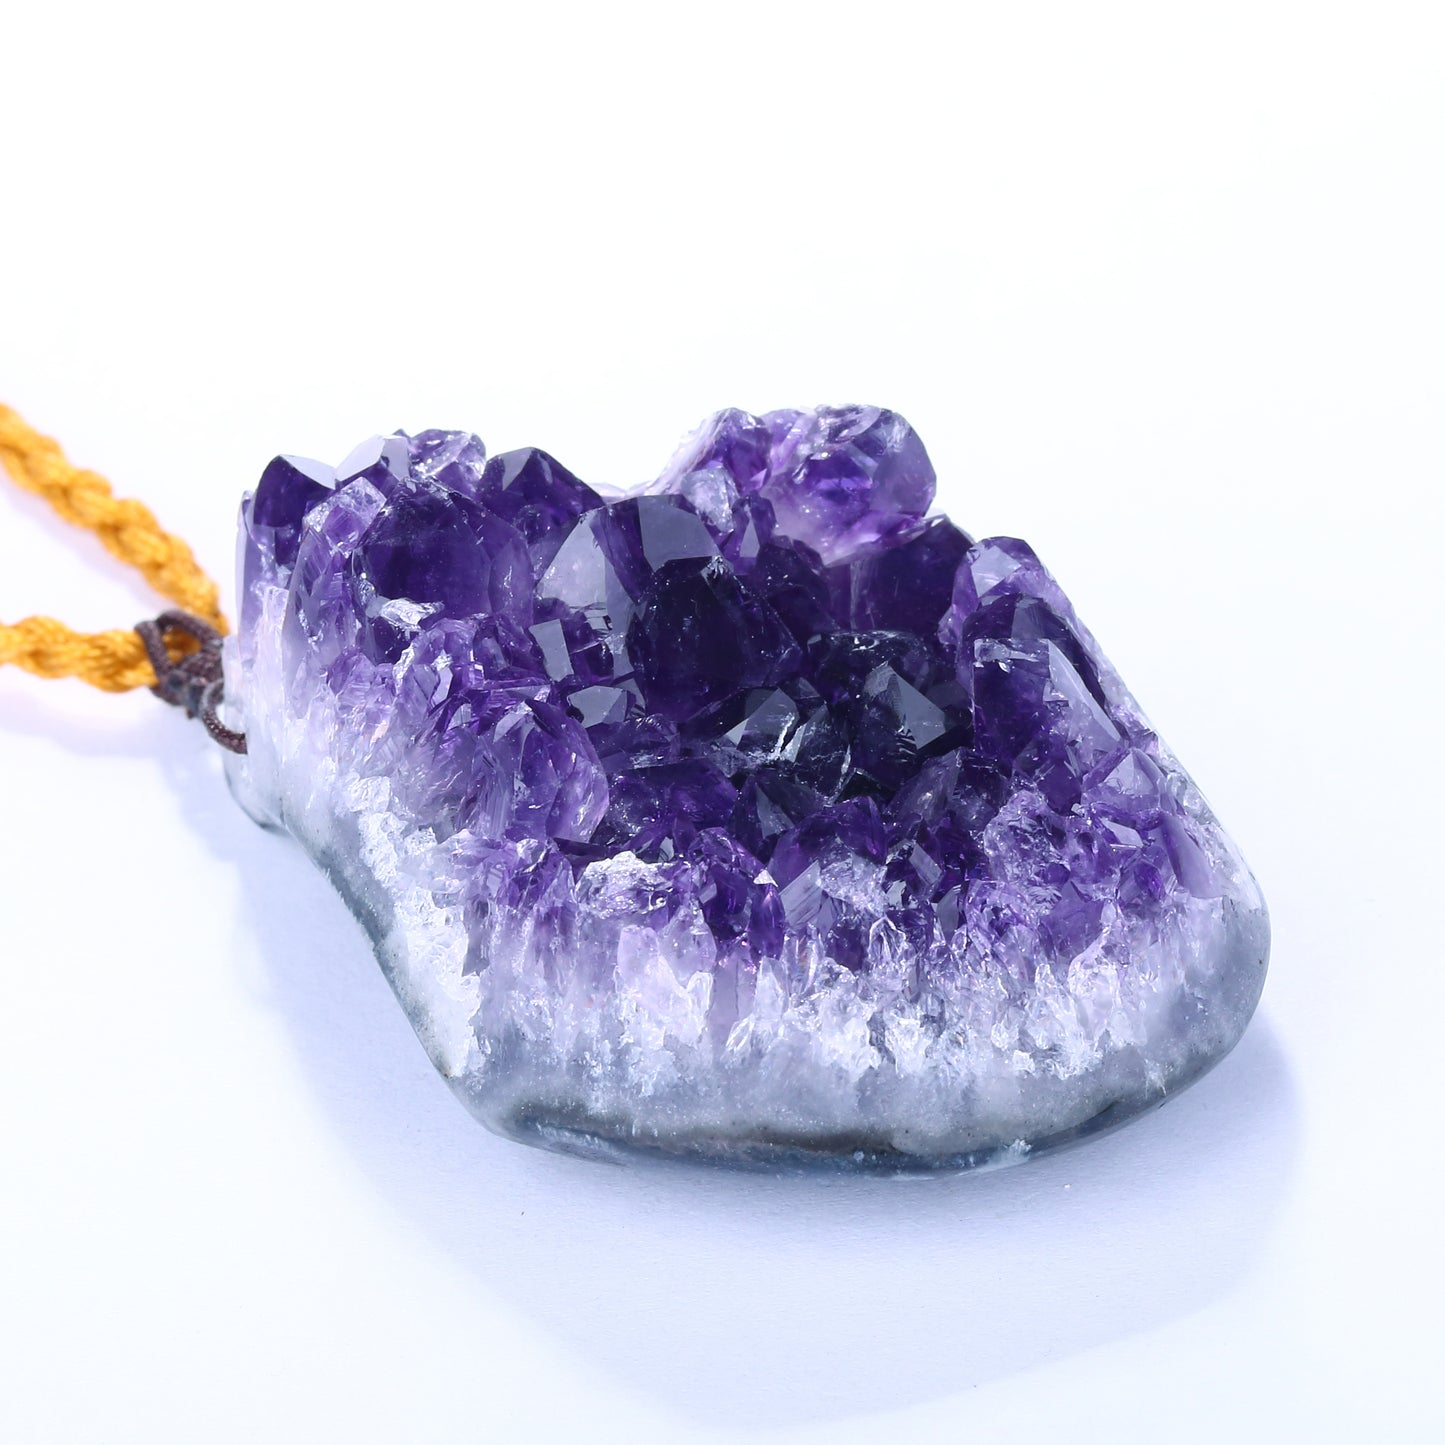 Natural Amethyst Pendant Jewelry Necklace 52cm, 55x42x22mm, 65g - MyGemGarden